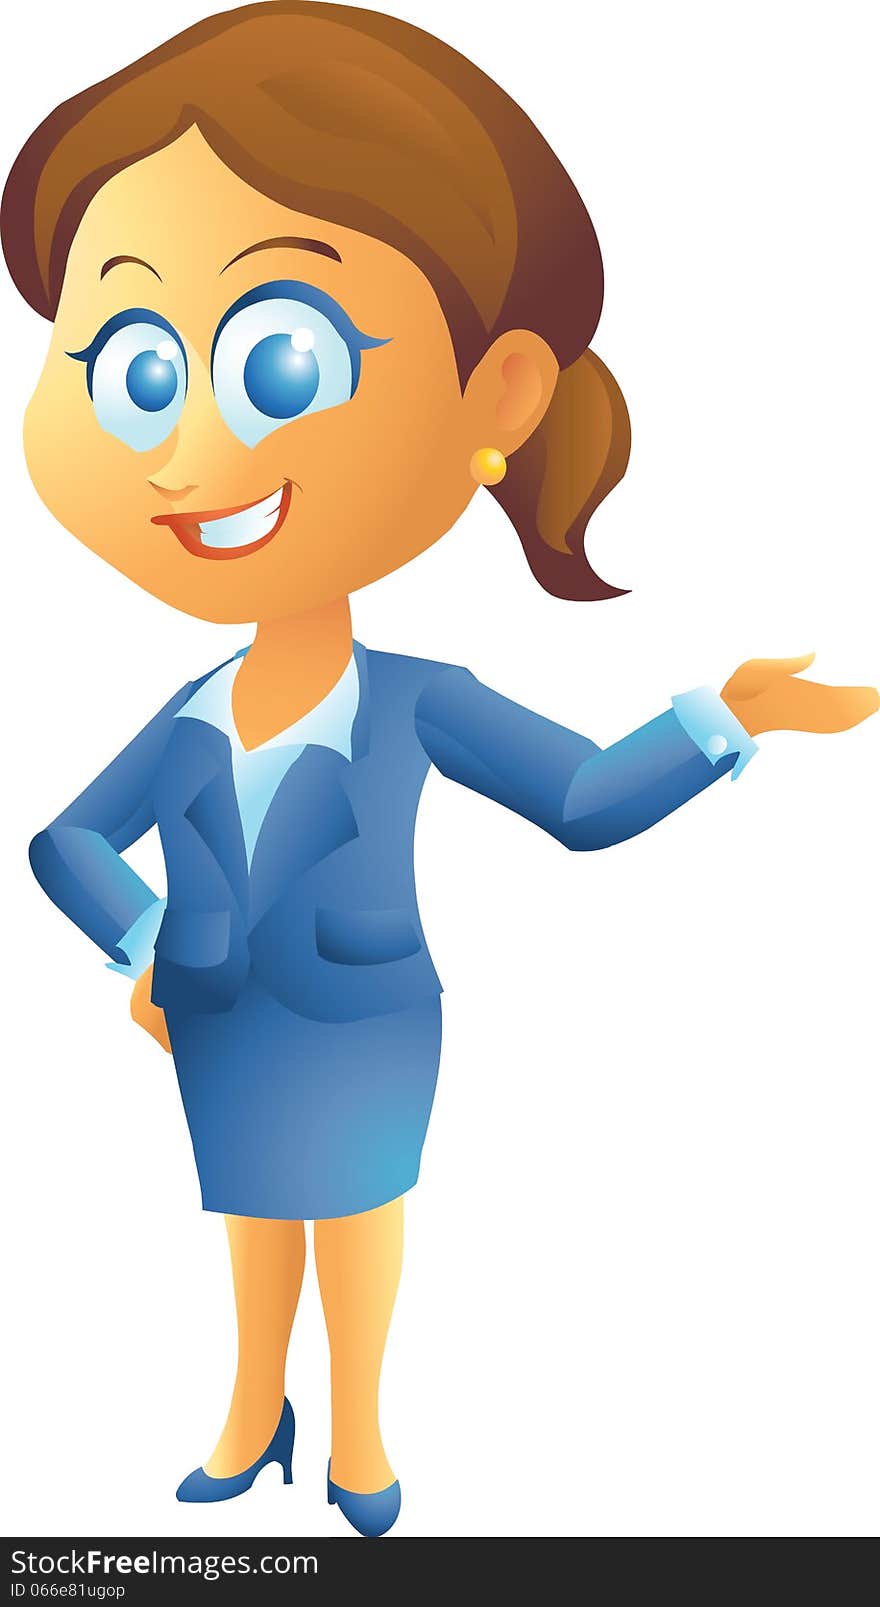 Business woman presenting isolated illustration. Business woman presenting isolated illustration